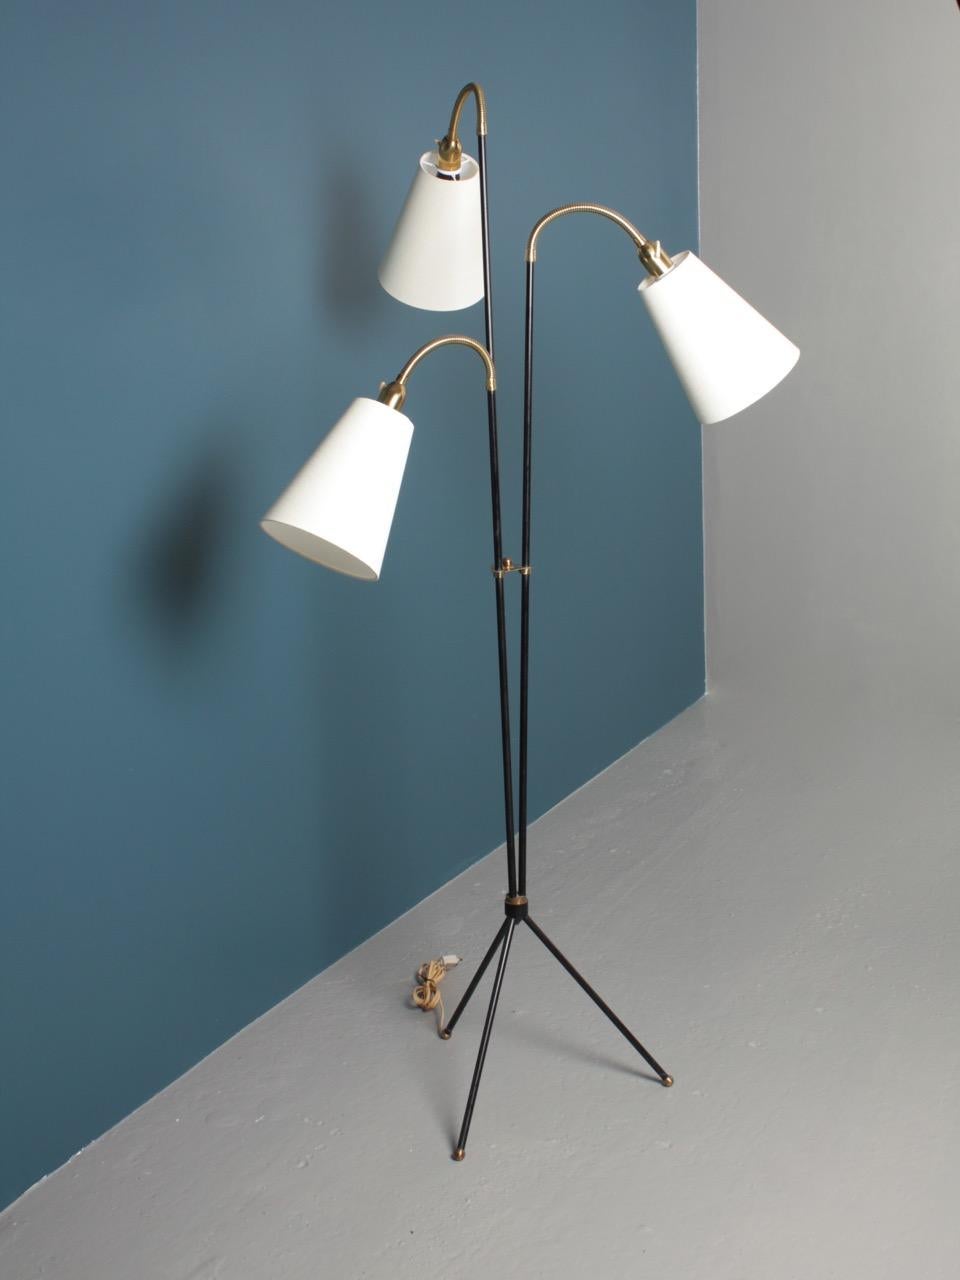 Great looking floor lamp in black painted metal and brass. Comes with new fabric shades. Designed and made by Holm Sorensen in the 1950s made in Denmark.